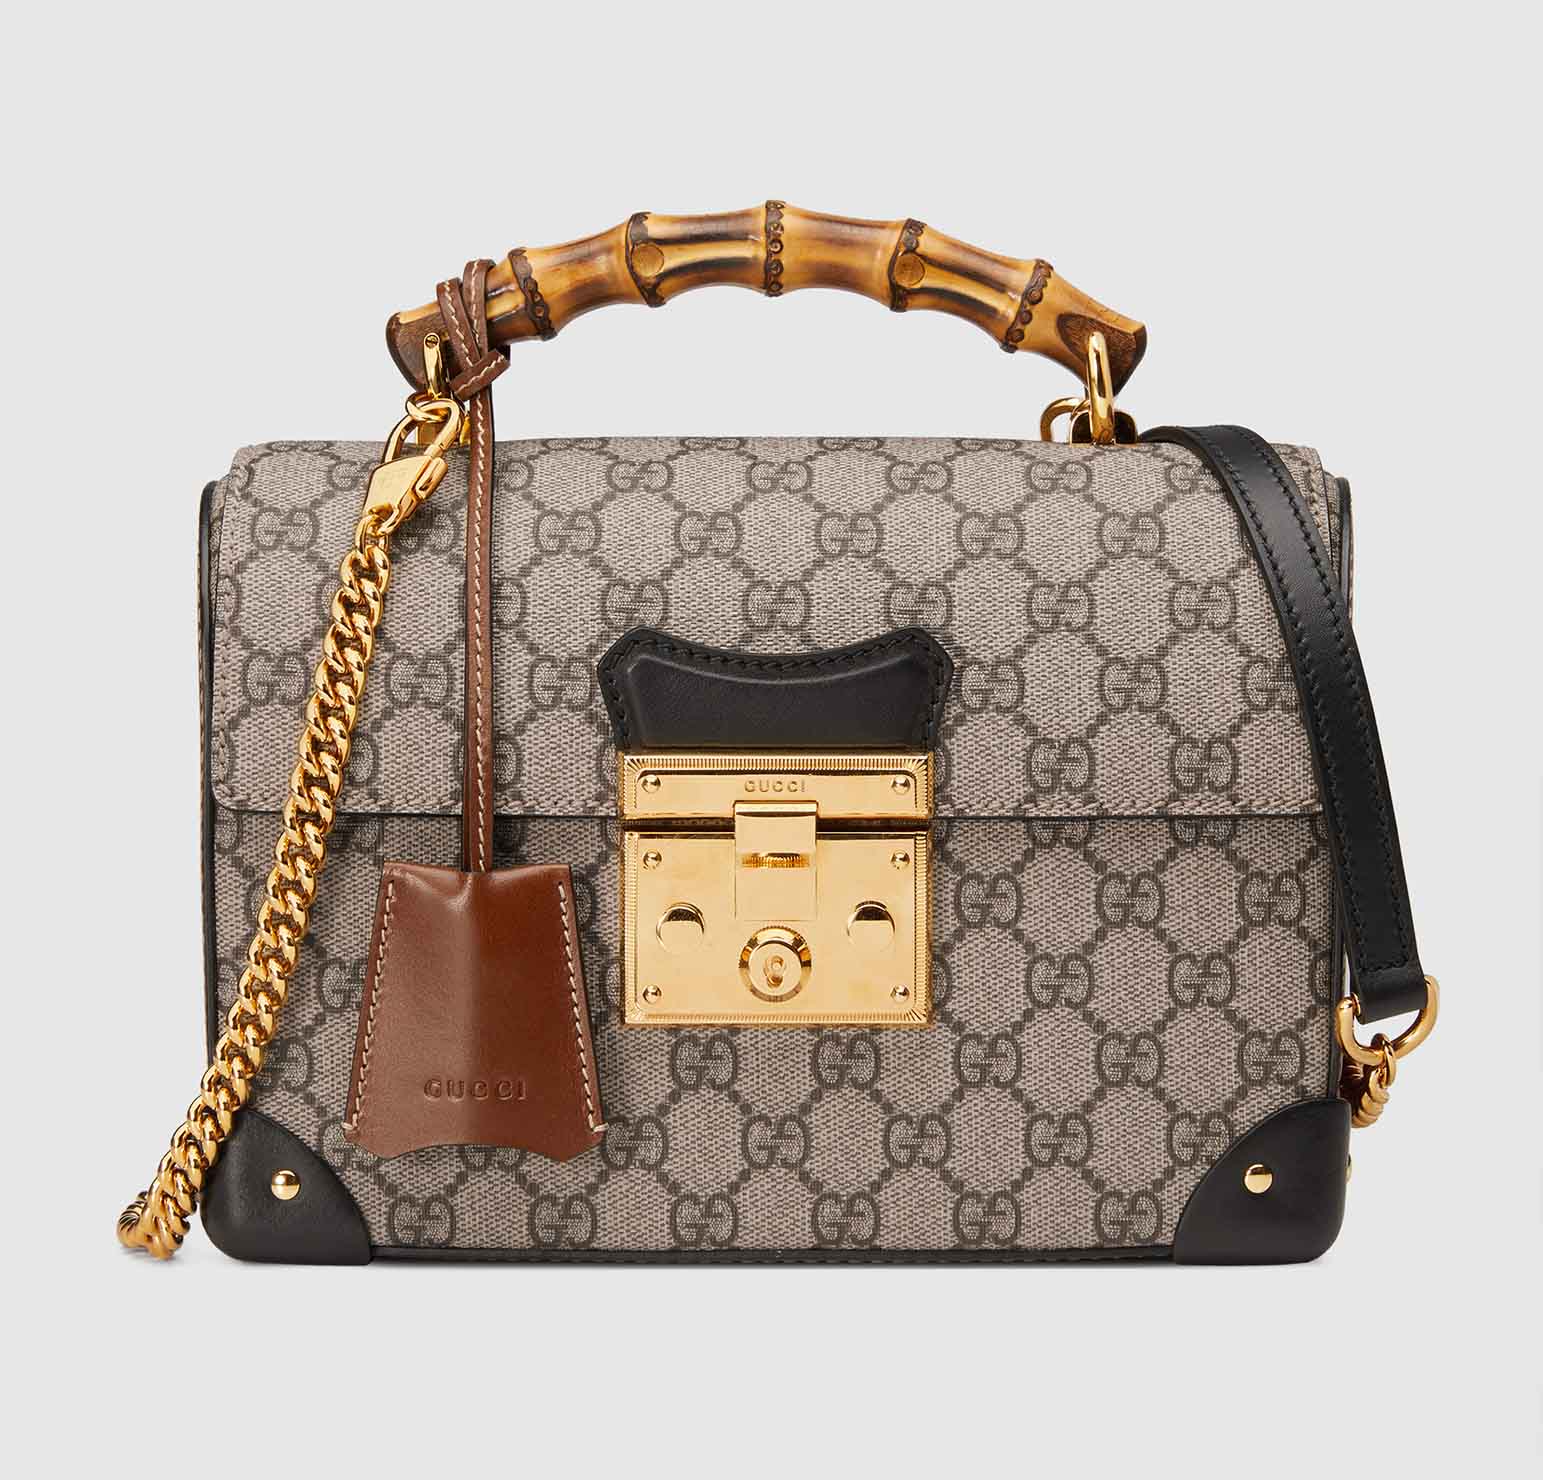 The Best Gucci Bags Outlet, SAVE 55%.